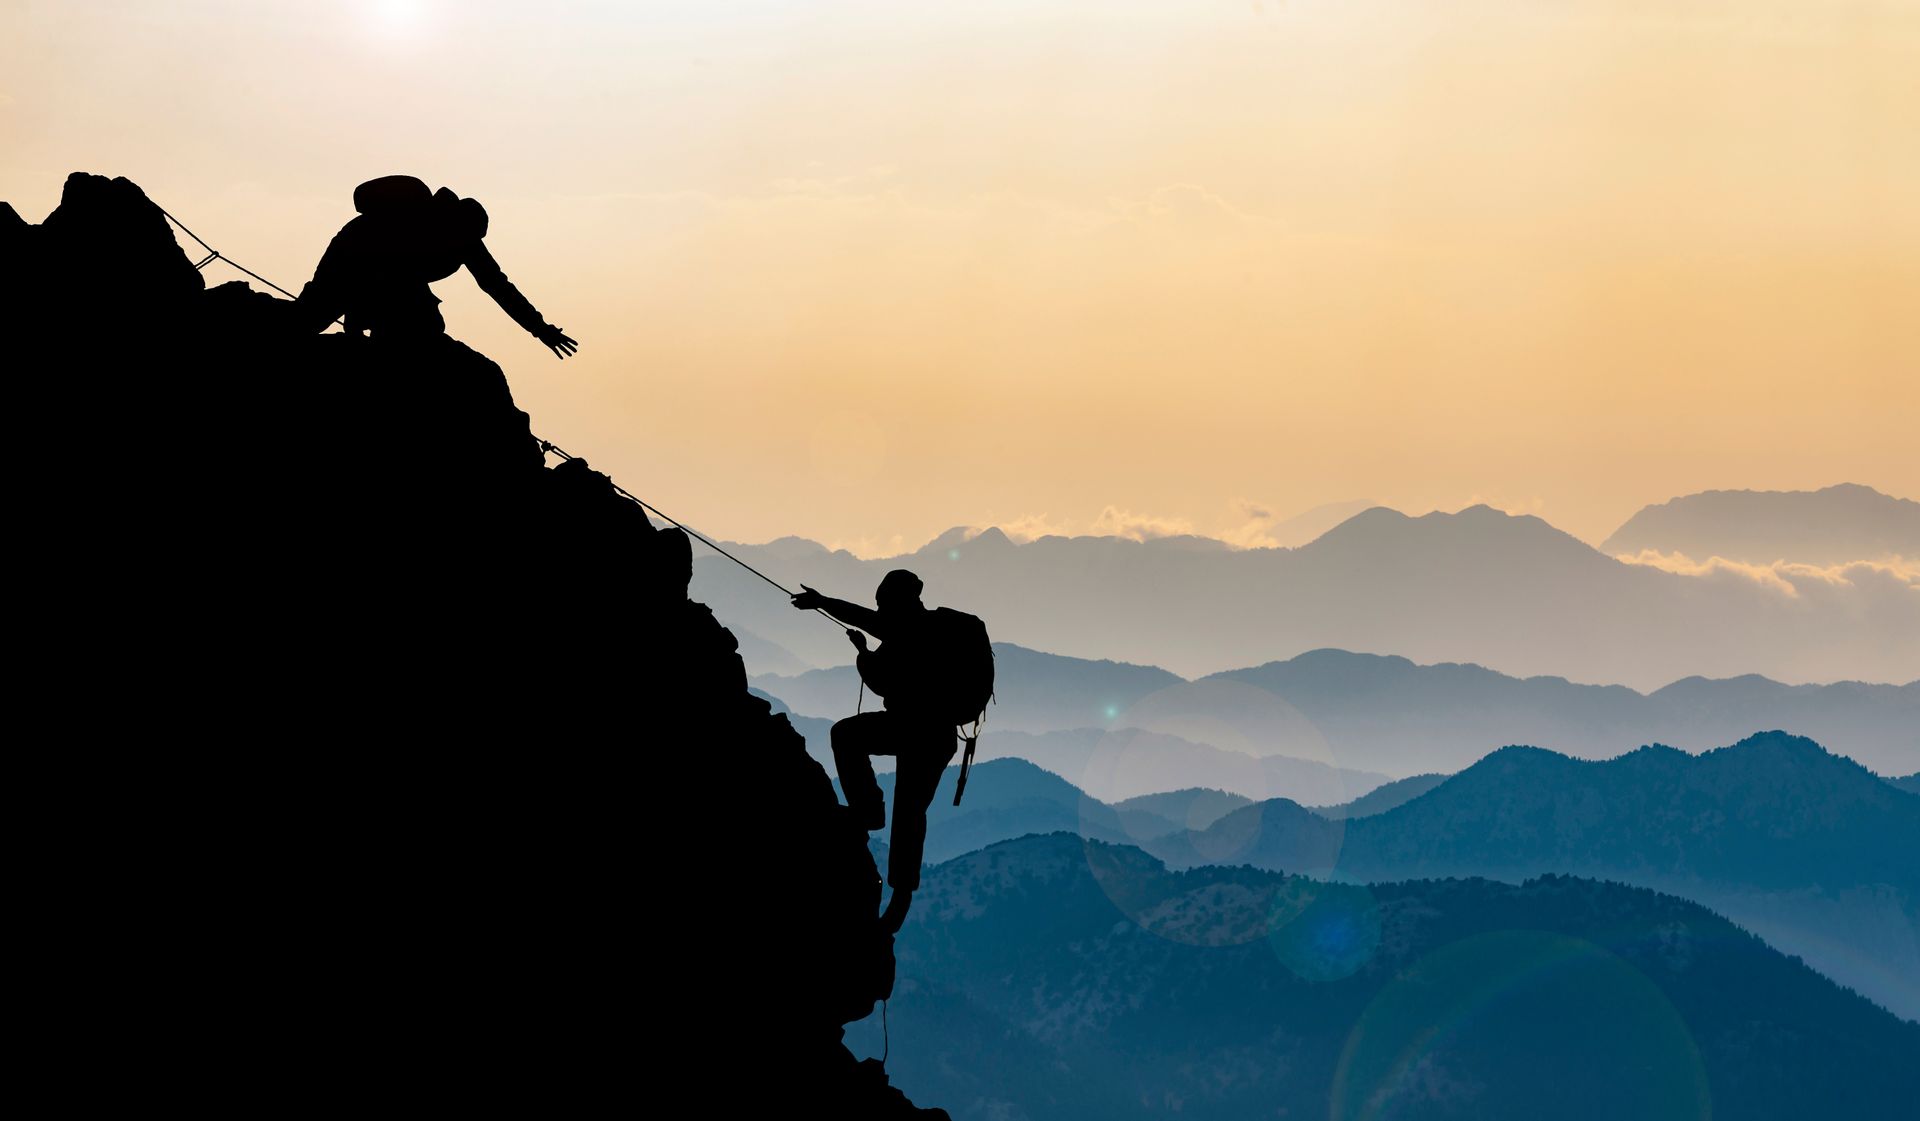 Silhouettes of two people climbing up a mountain